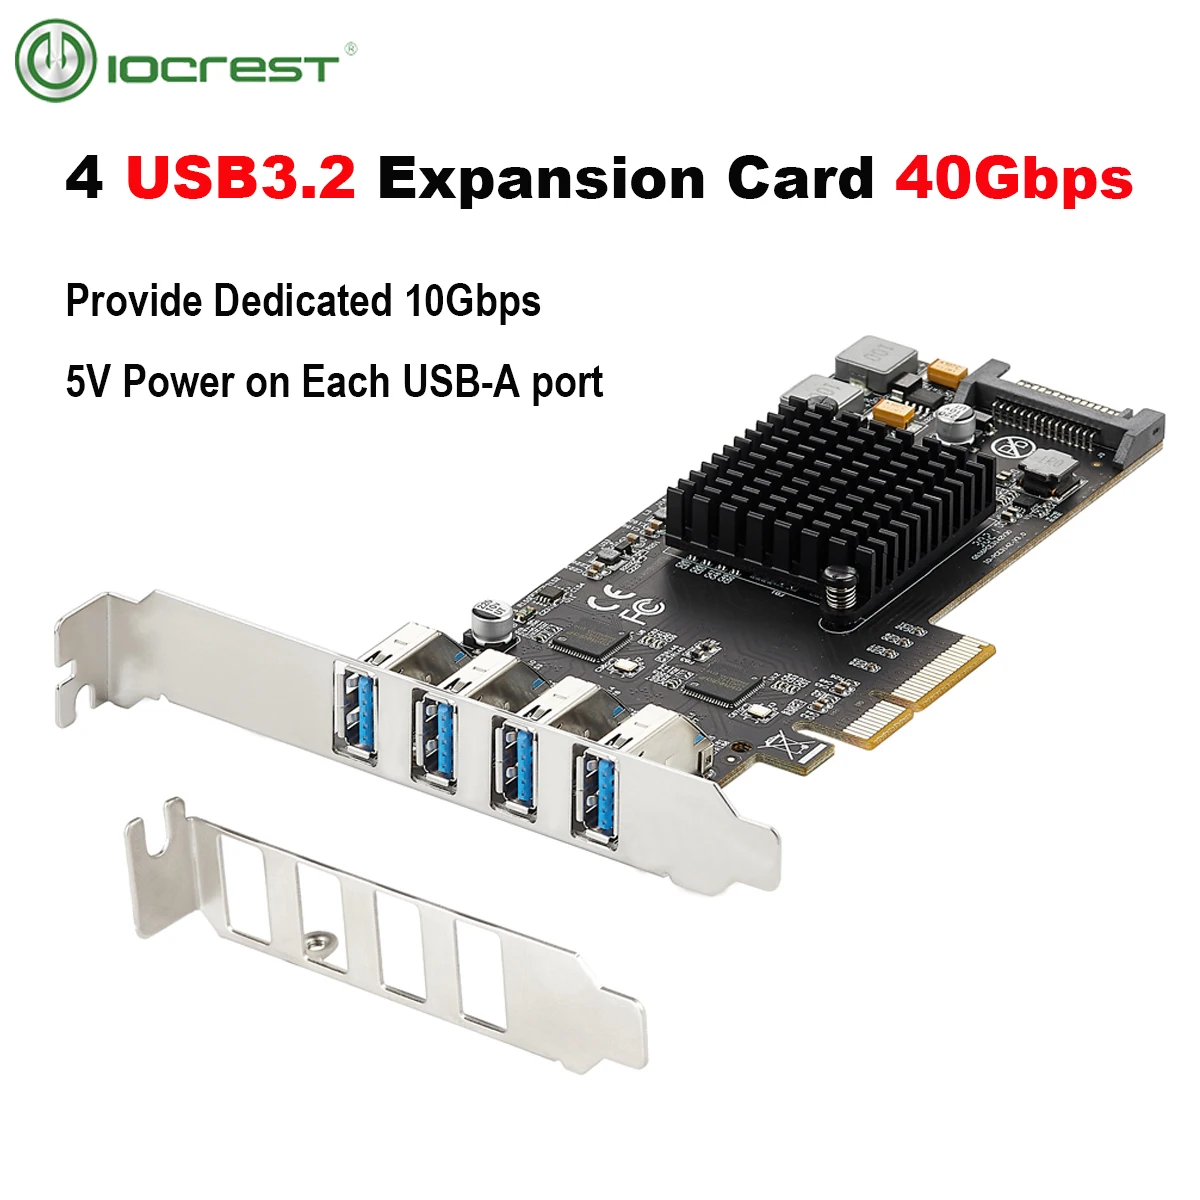 

IOCREST Host Expansion Controller Pcie 3.0 X4 to 4 Ports USB3.2 Gen2 Type-a Dedicated 10Gbps USB 3.2 Transfer Bandwidth for Each